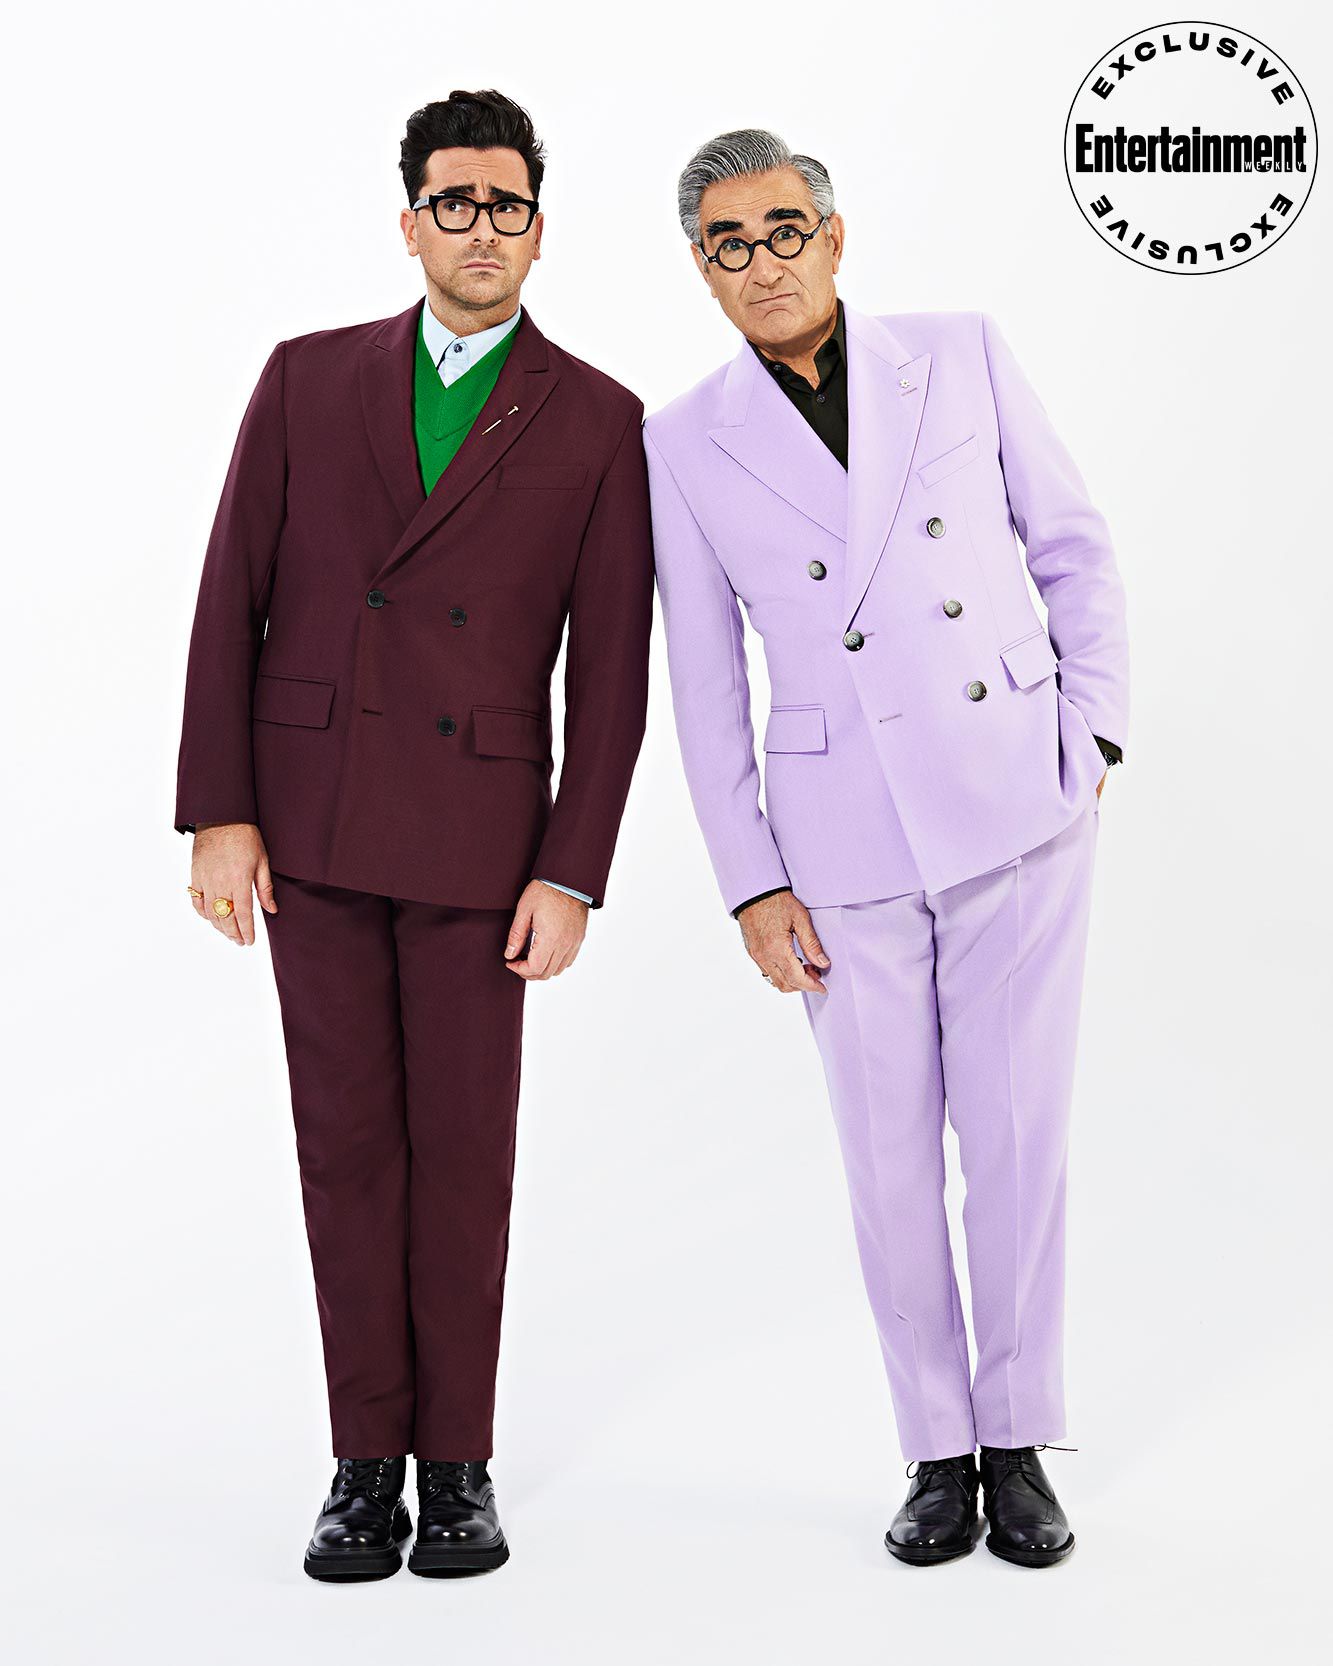 Sjældent patient Melting Dan and Eugene Levy are two of EW's Entertainers of the Year | EW.com